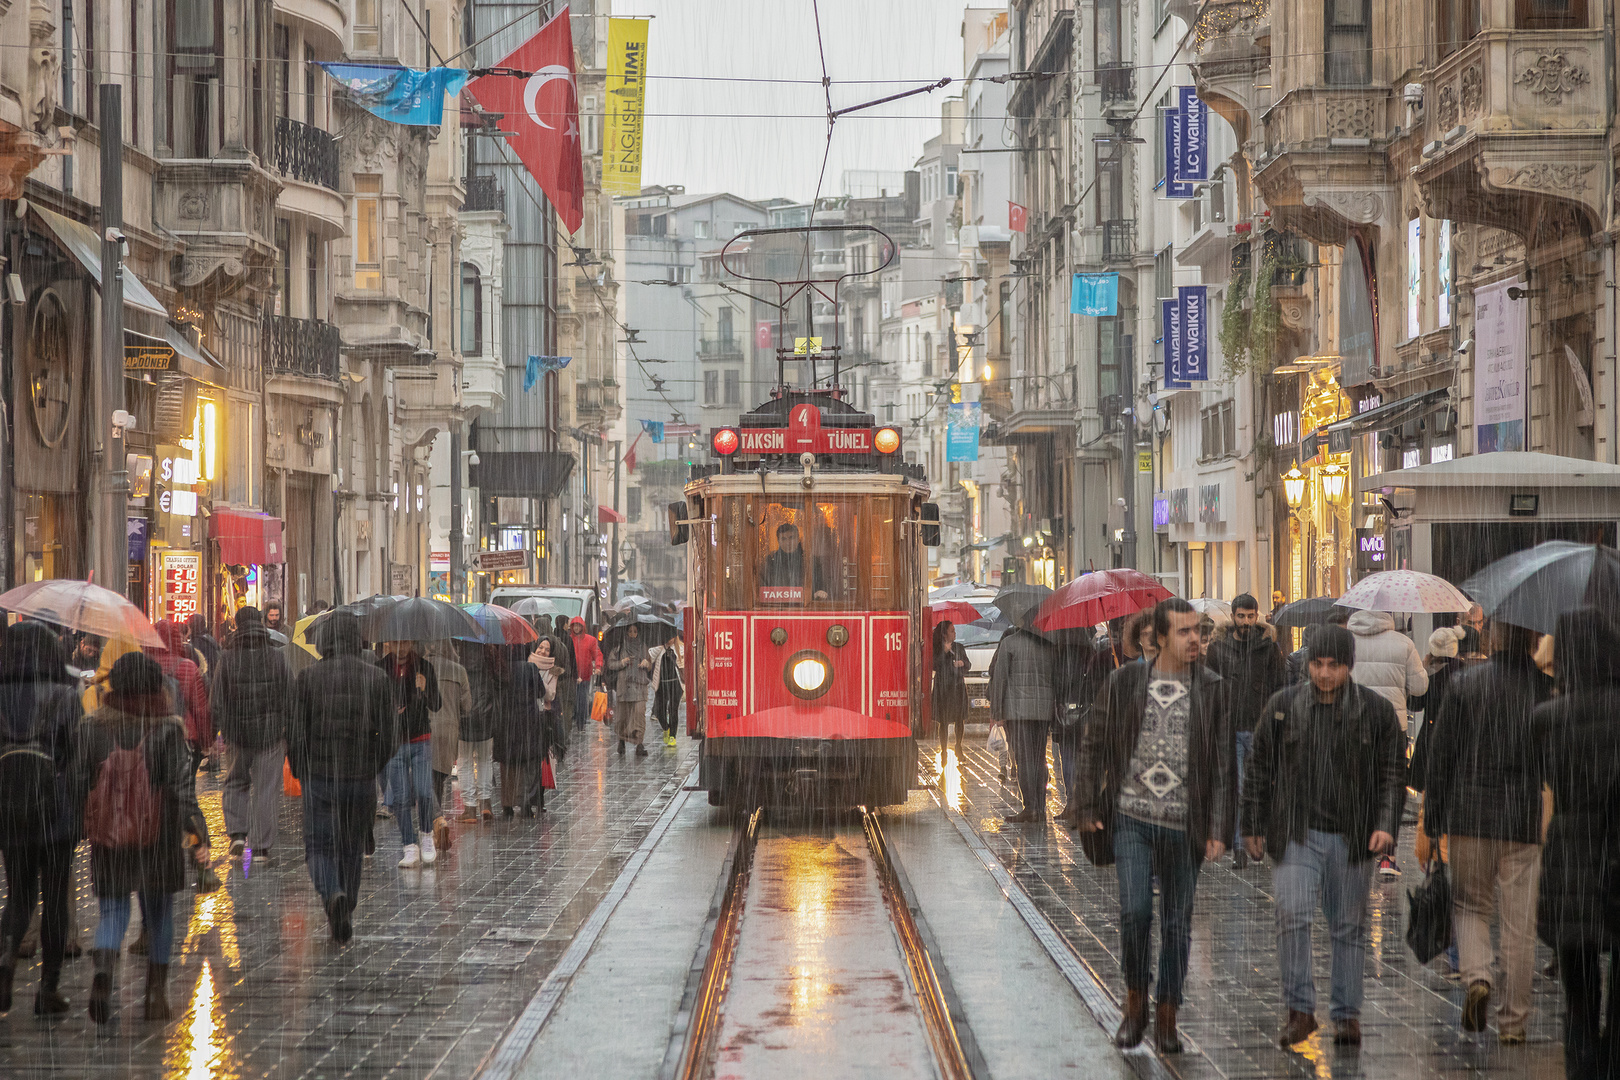 A rainy Day in Istanbul...